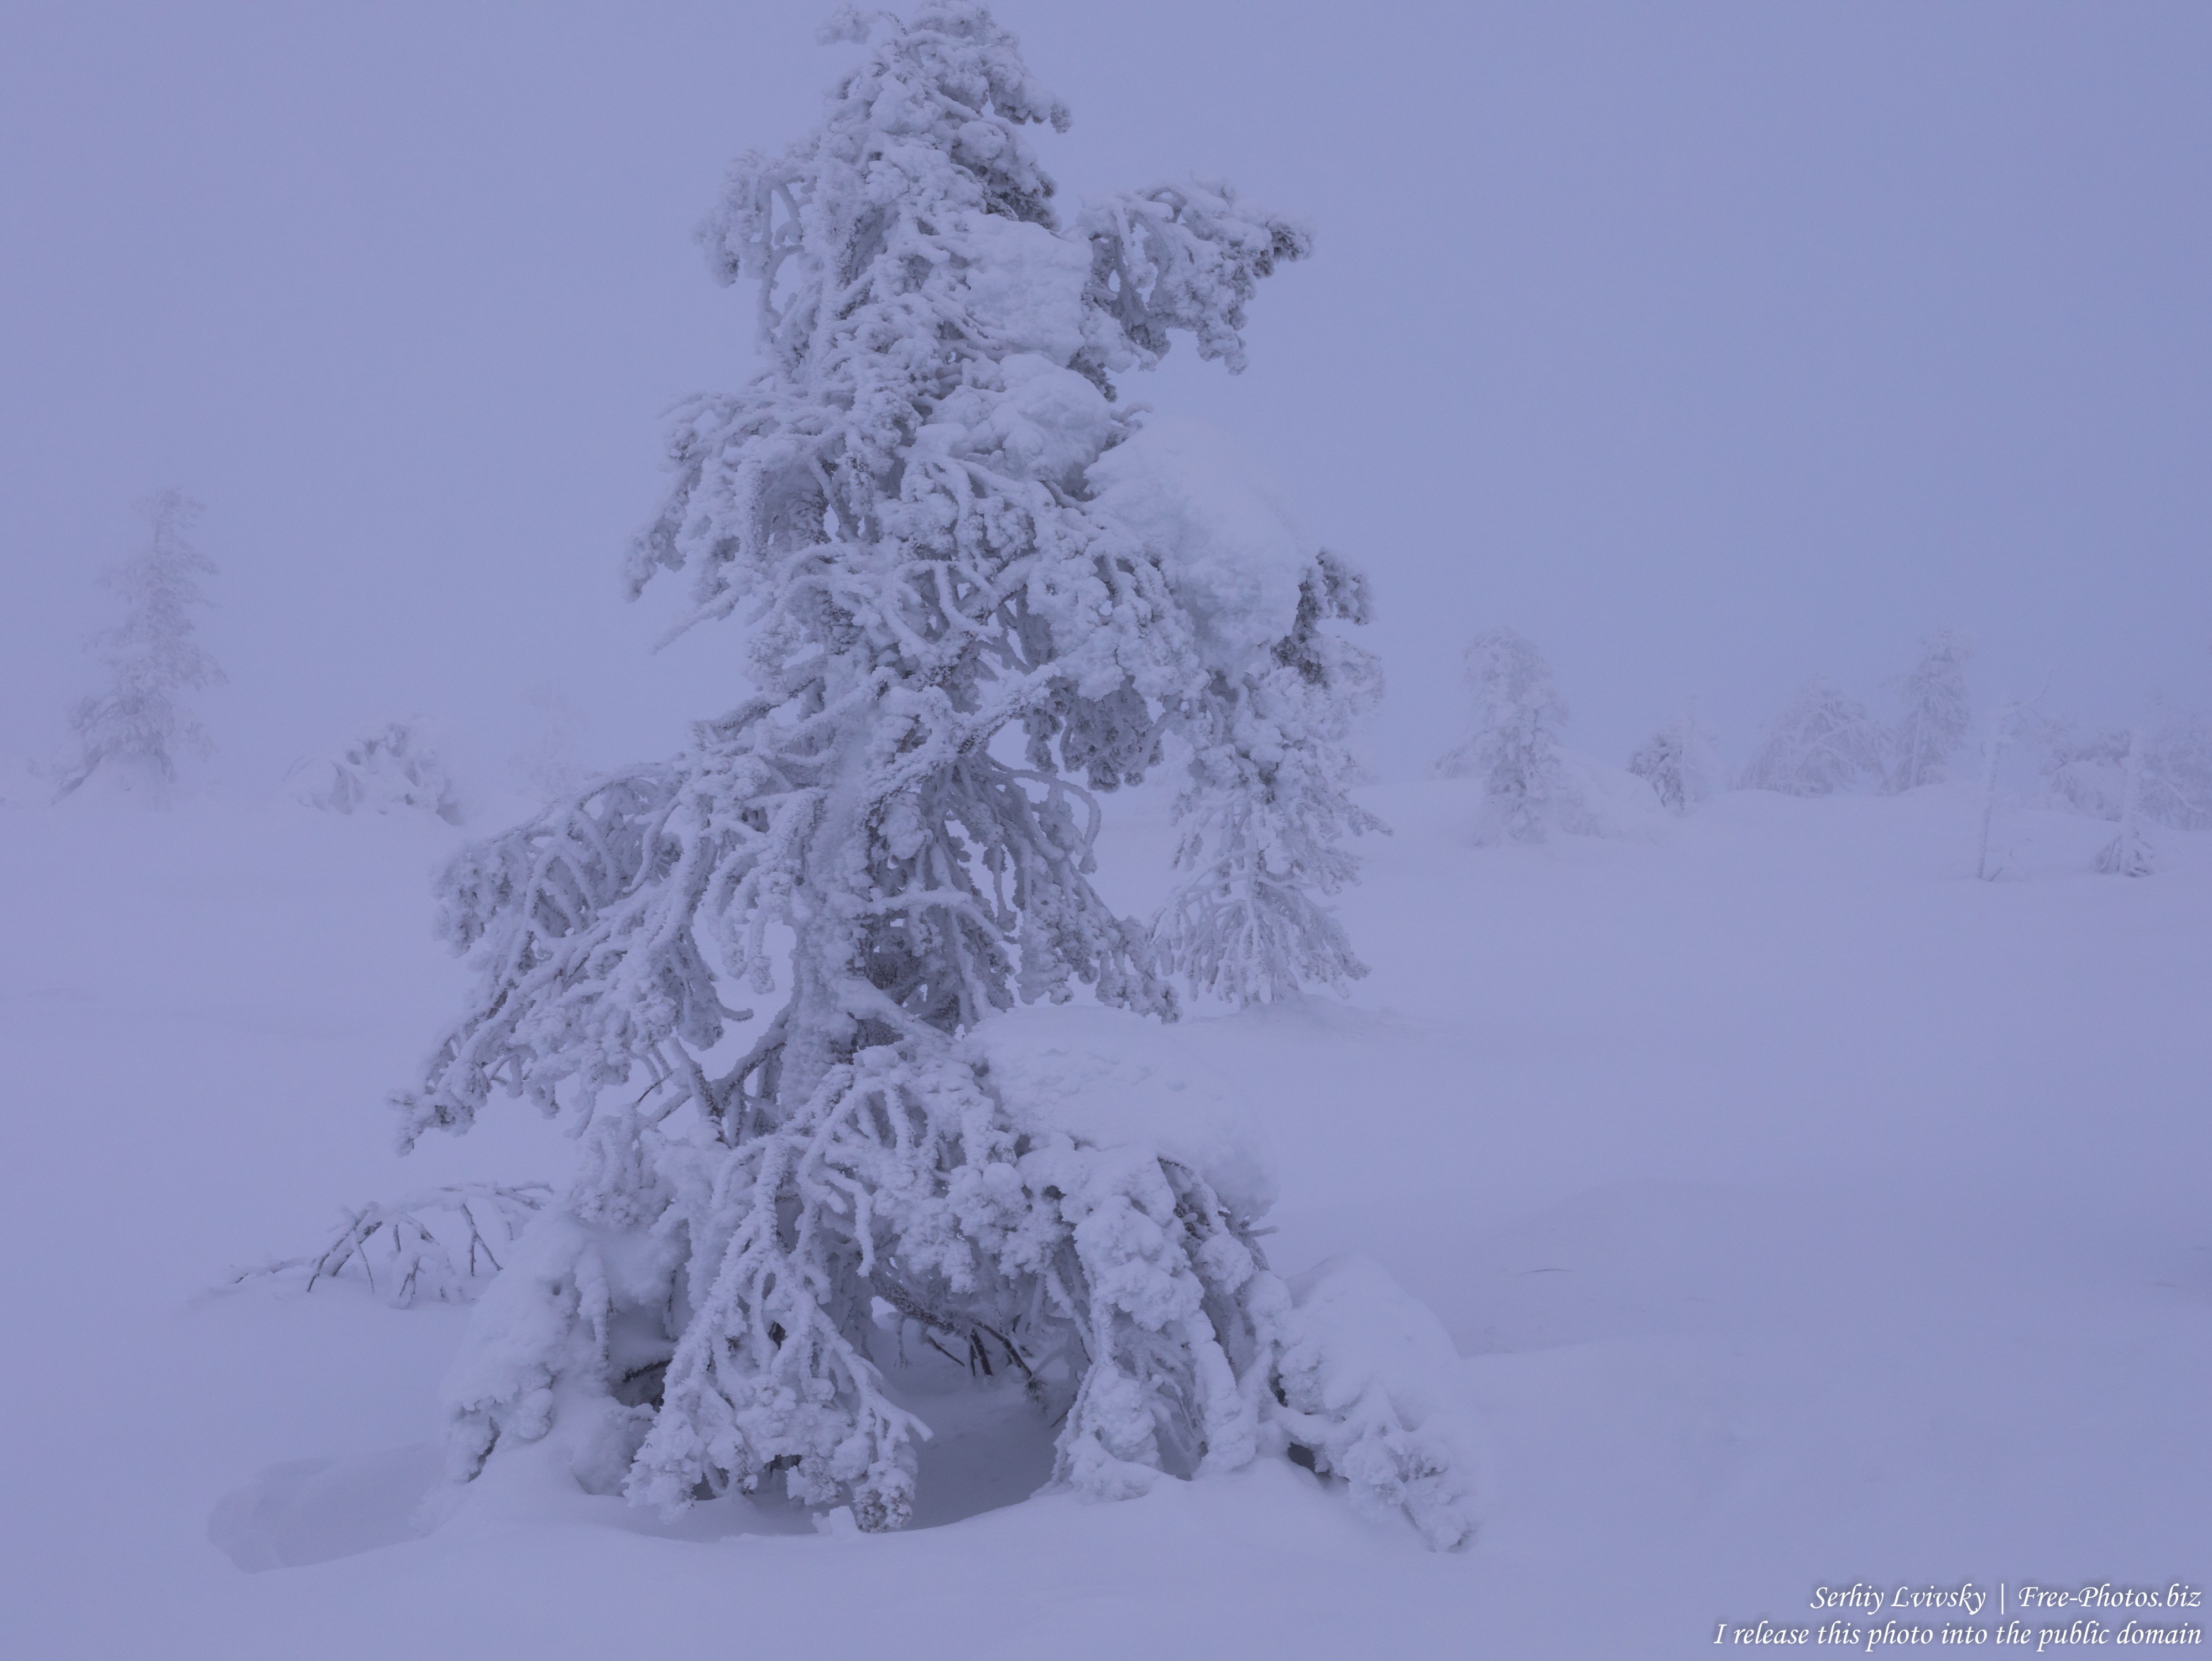 Sallatunturi, Finland, photographed in January 2020 by Serhiy Lvivsky, picture 7